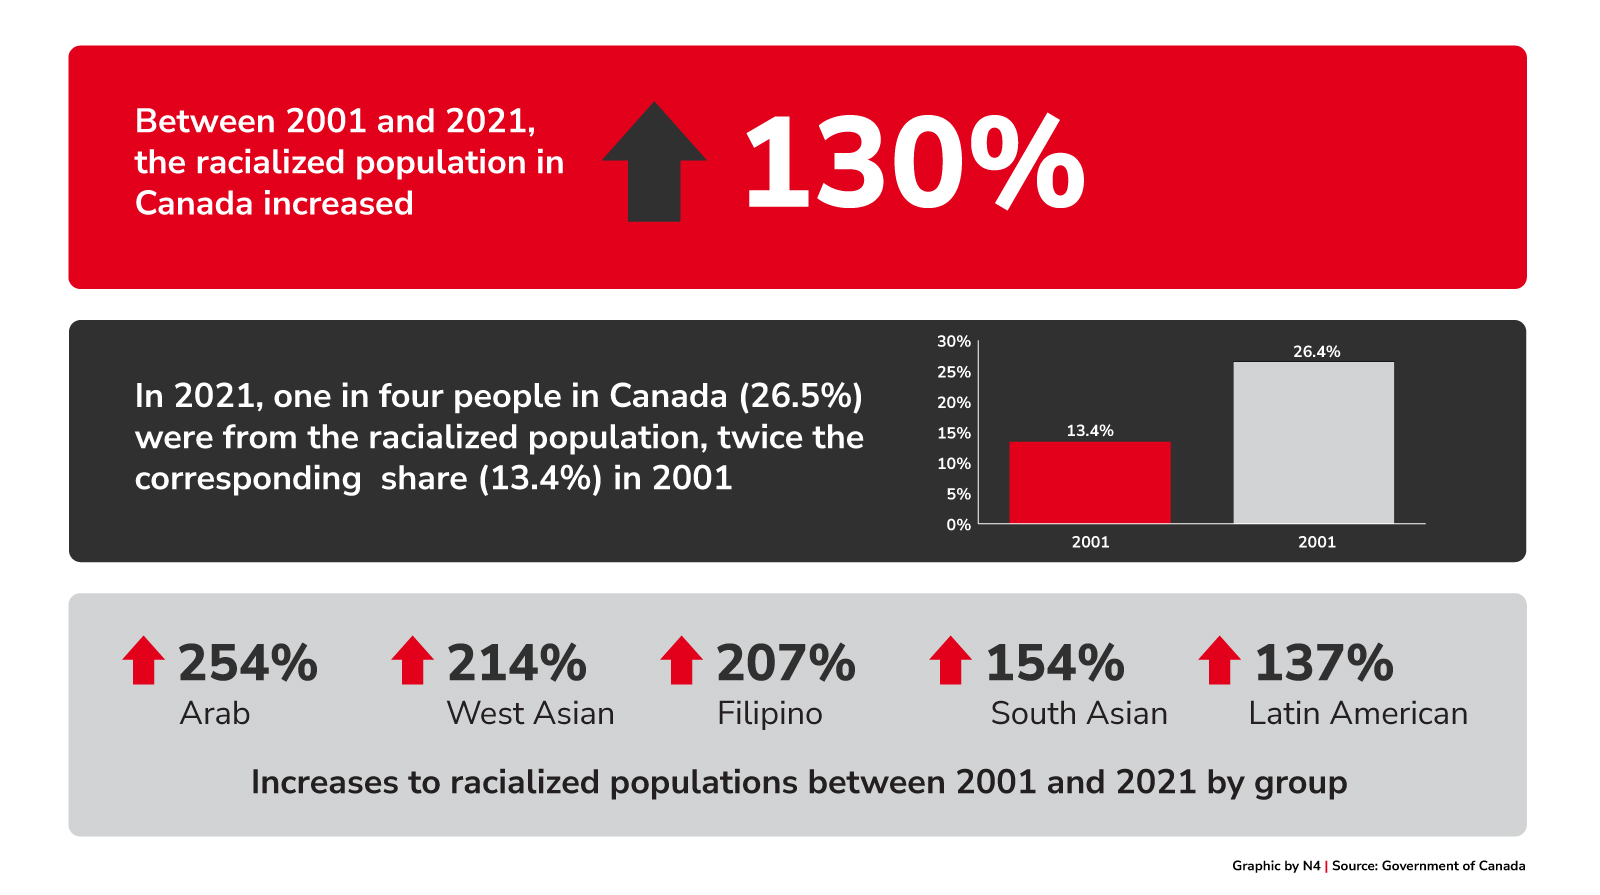 Increases to Canada’s racialized population between 2001 and 2021